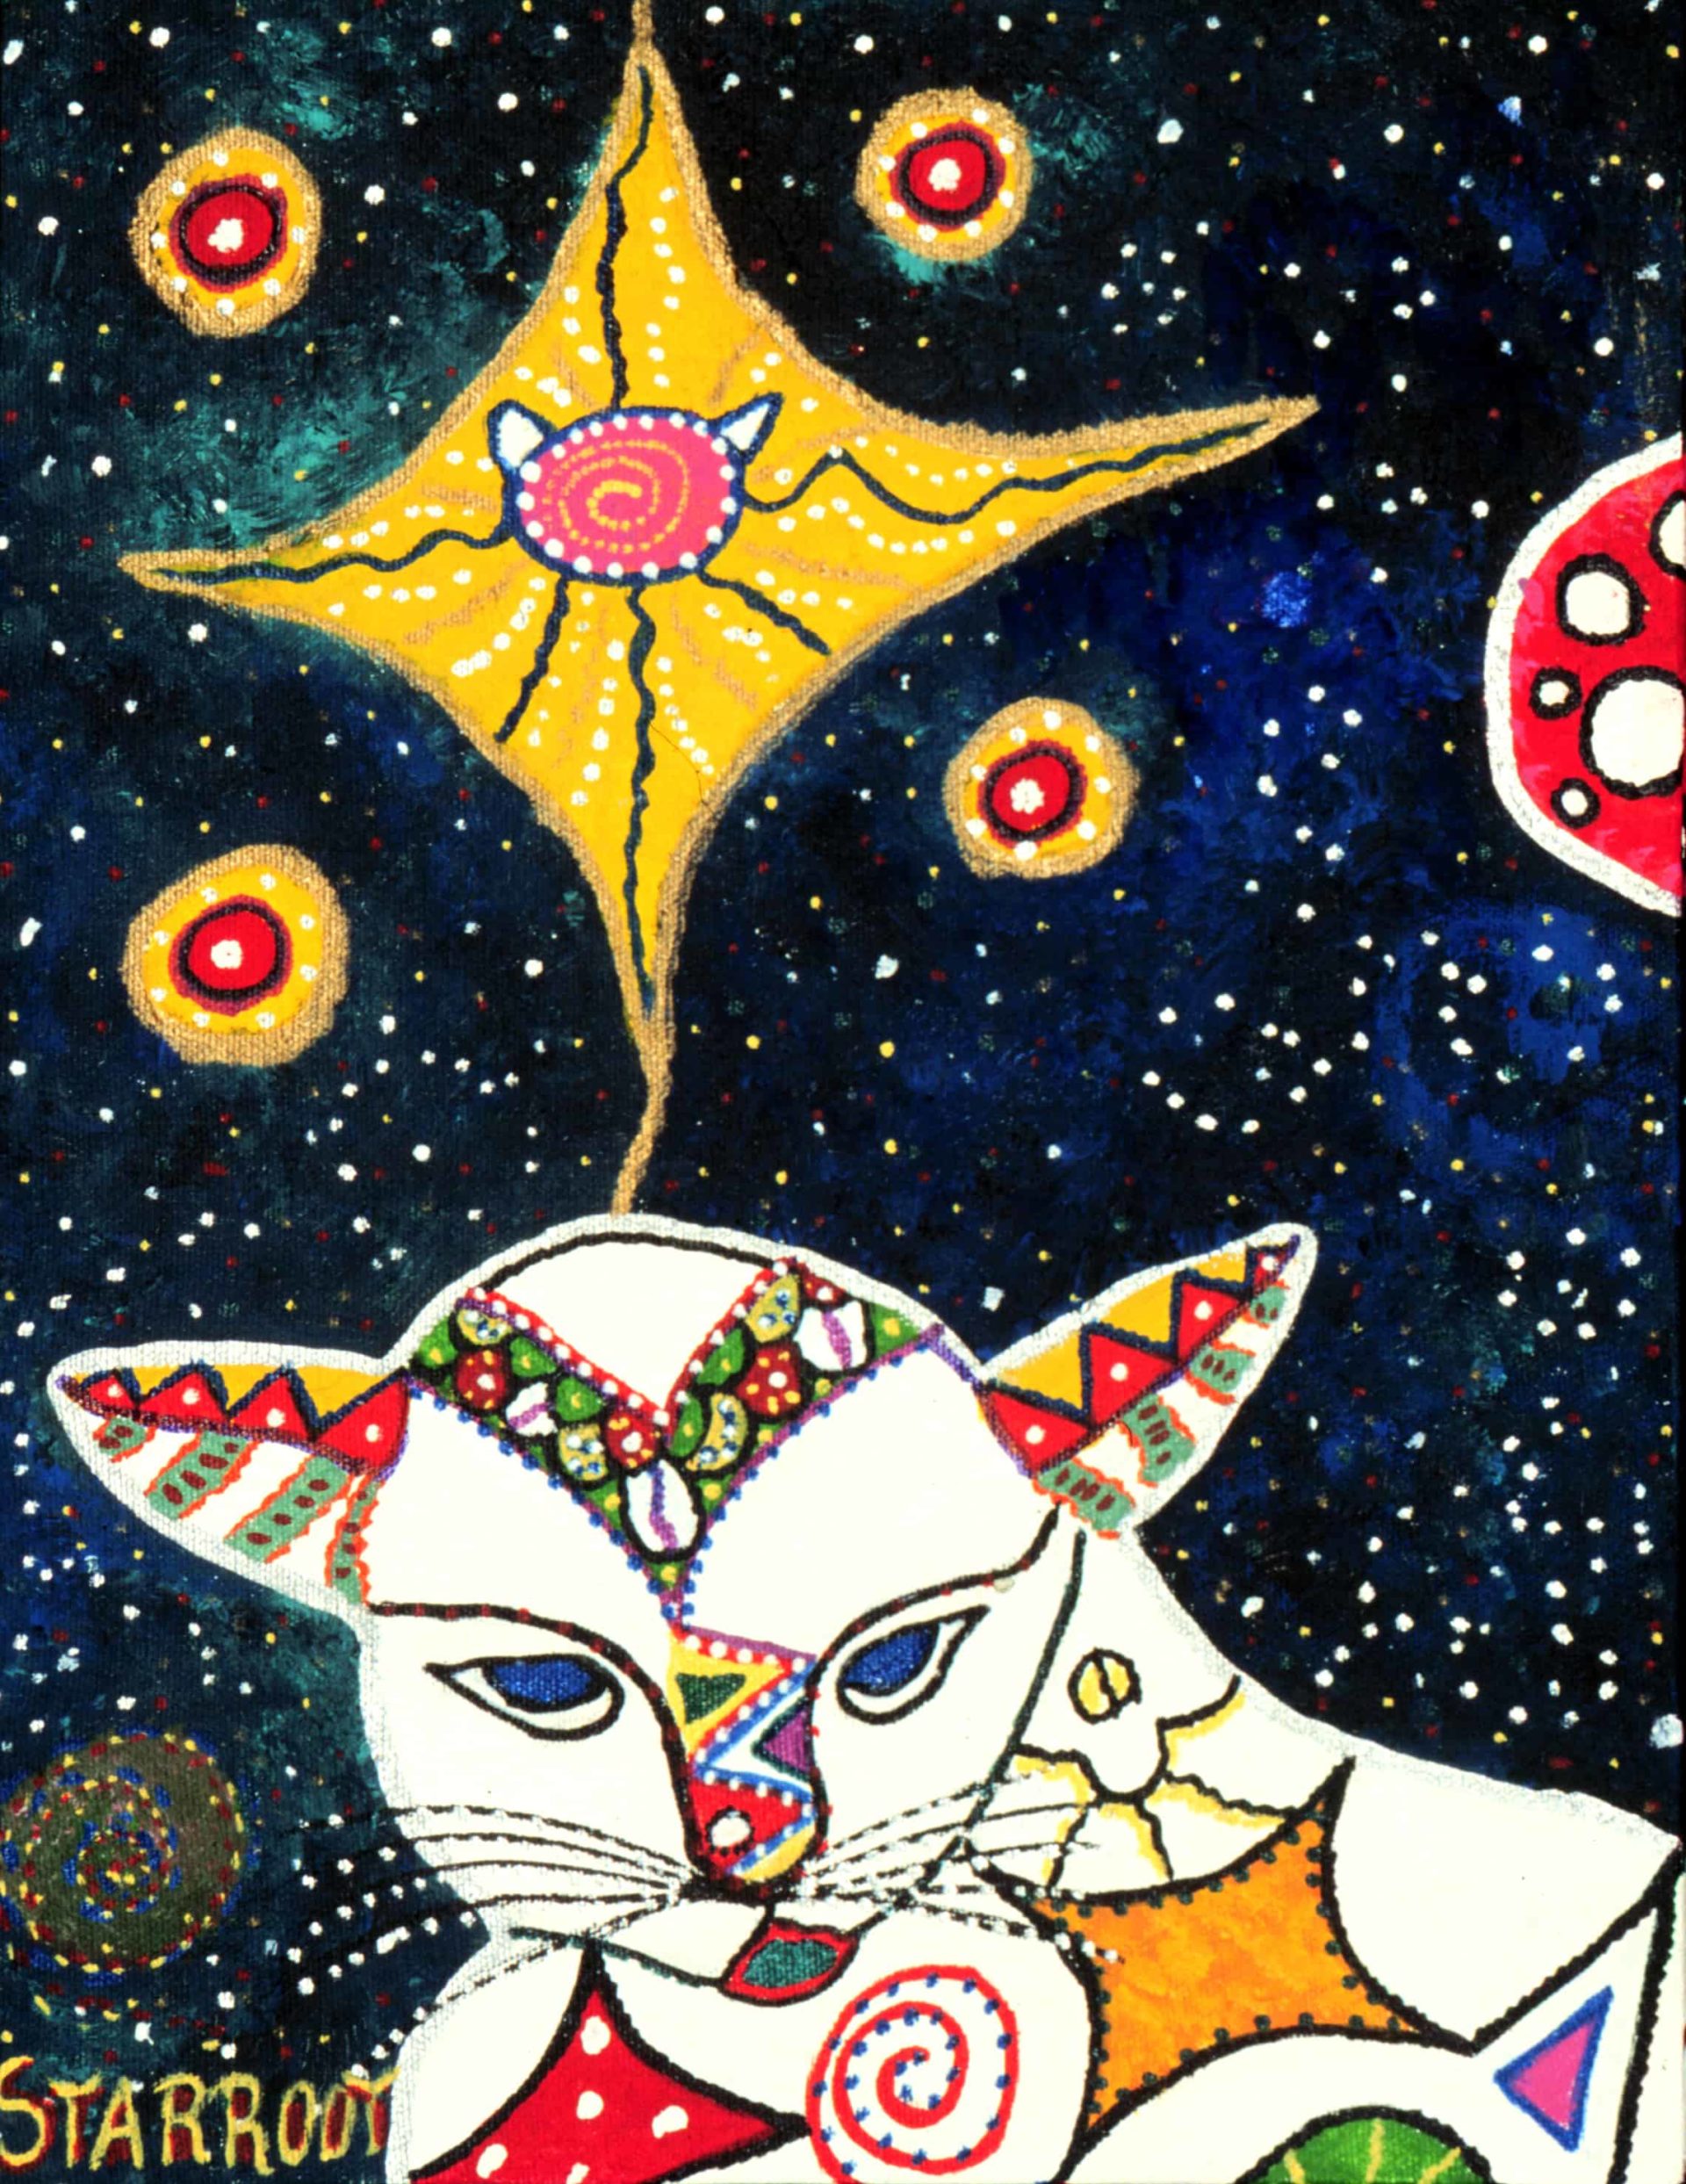 Cat of the Milky Way by Starroot